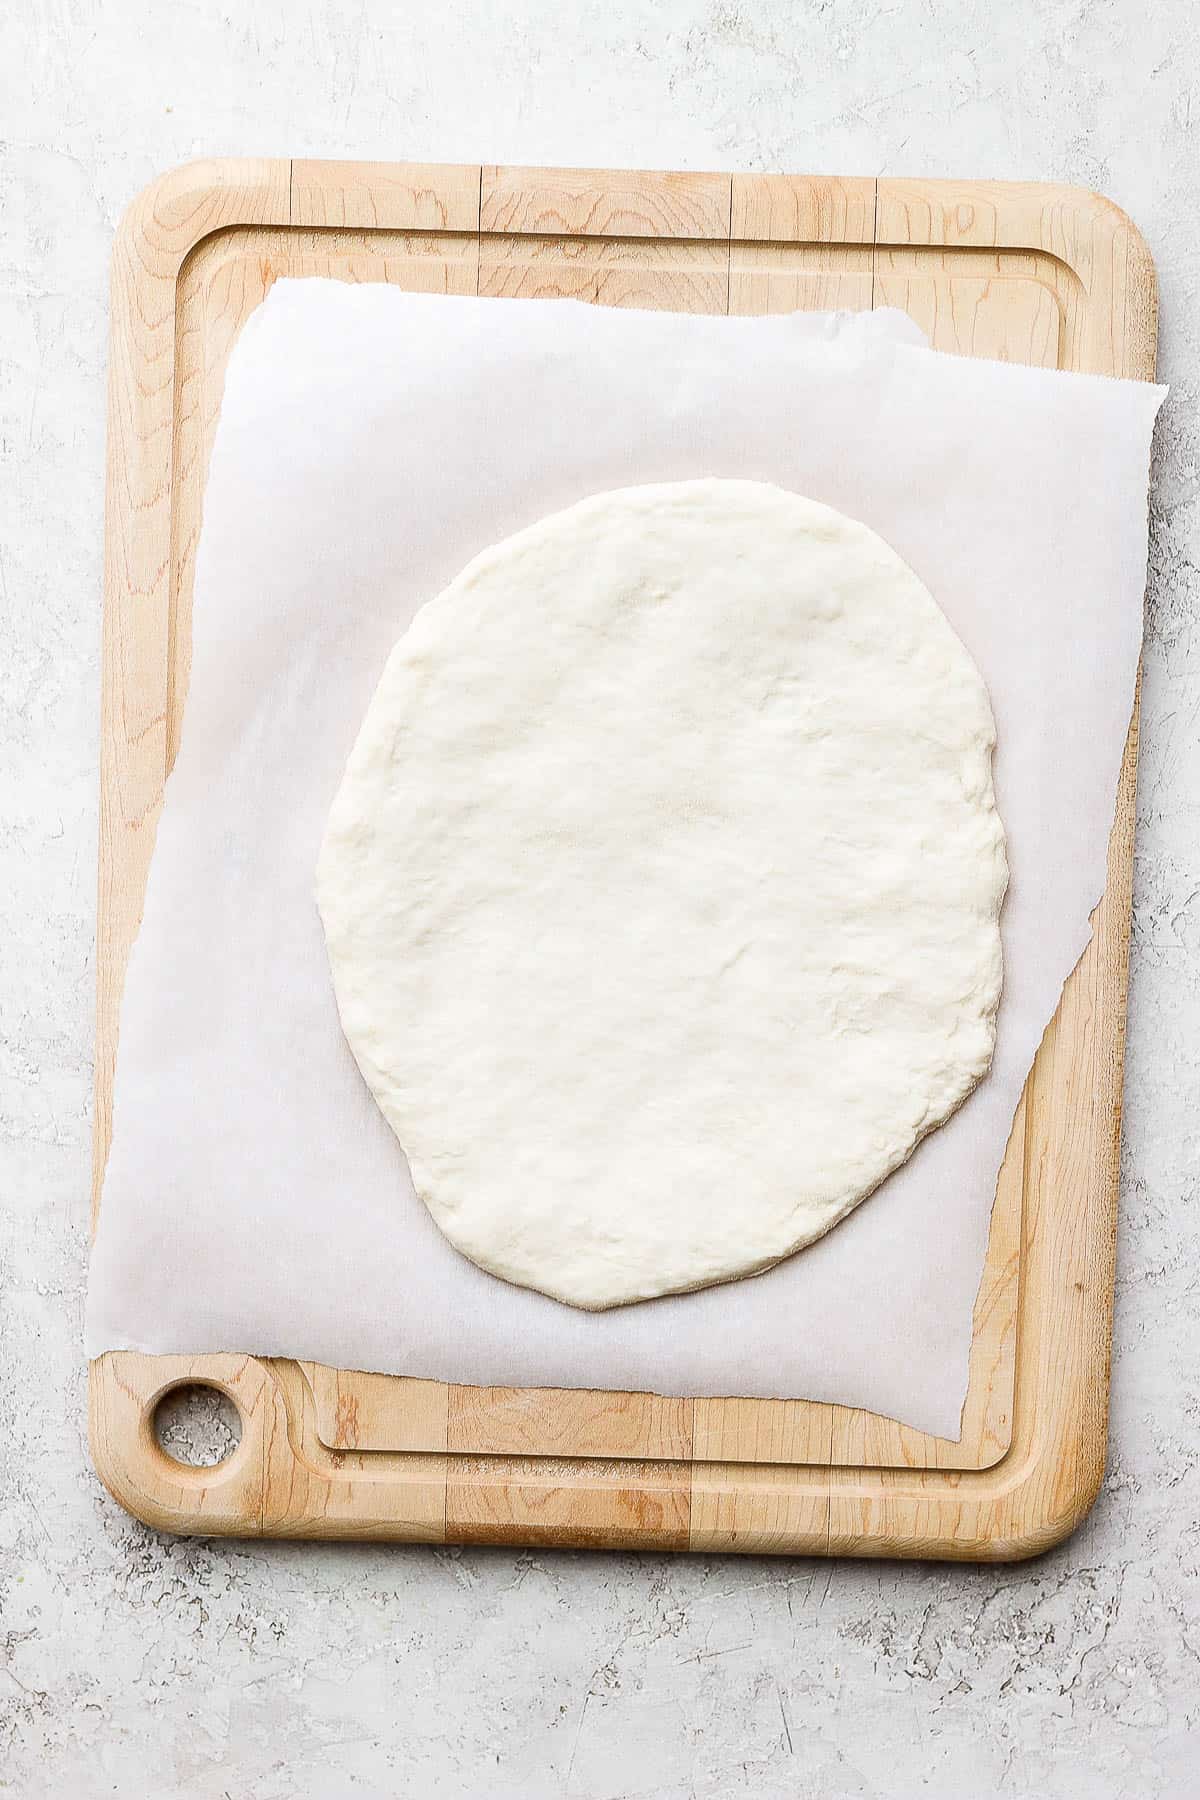 A portion of pizza dough spread out on top of parchment paper.